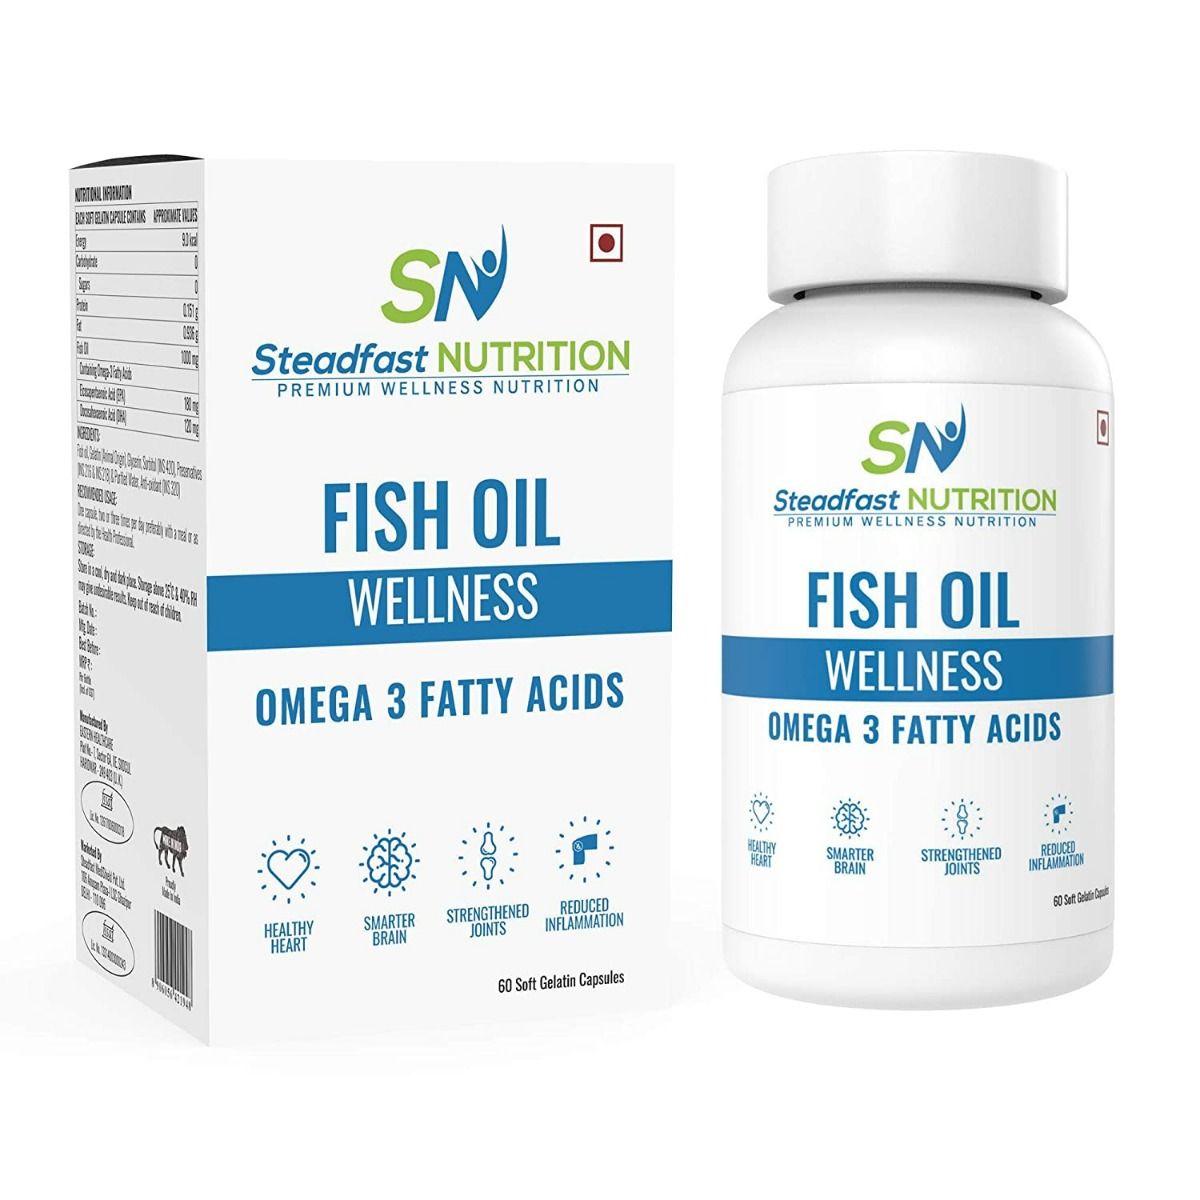 Steadfast Nutrition Fish Oil Wellness Omega 3 Fatty Acids Softgel Capsule, 60 Count, Pack of 1 